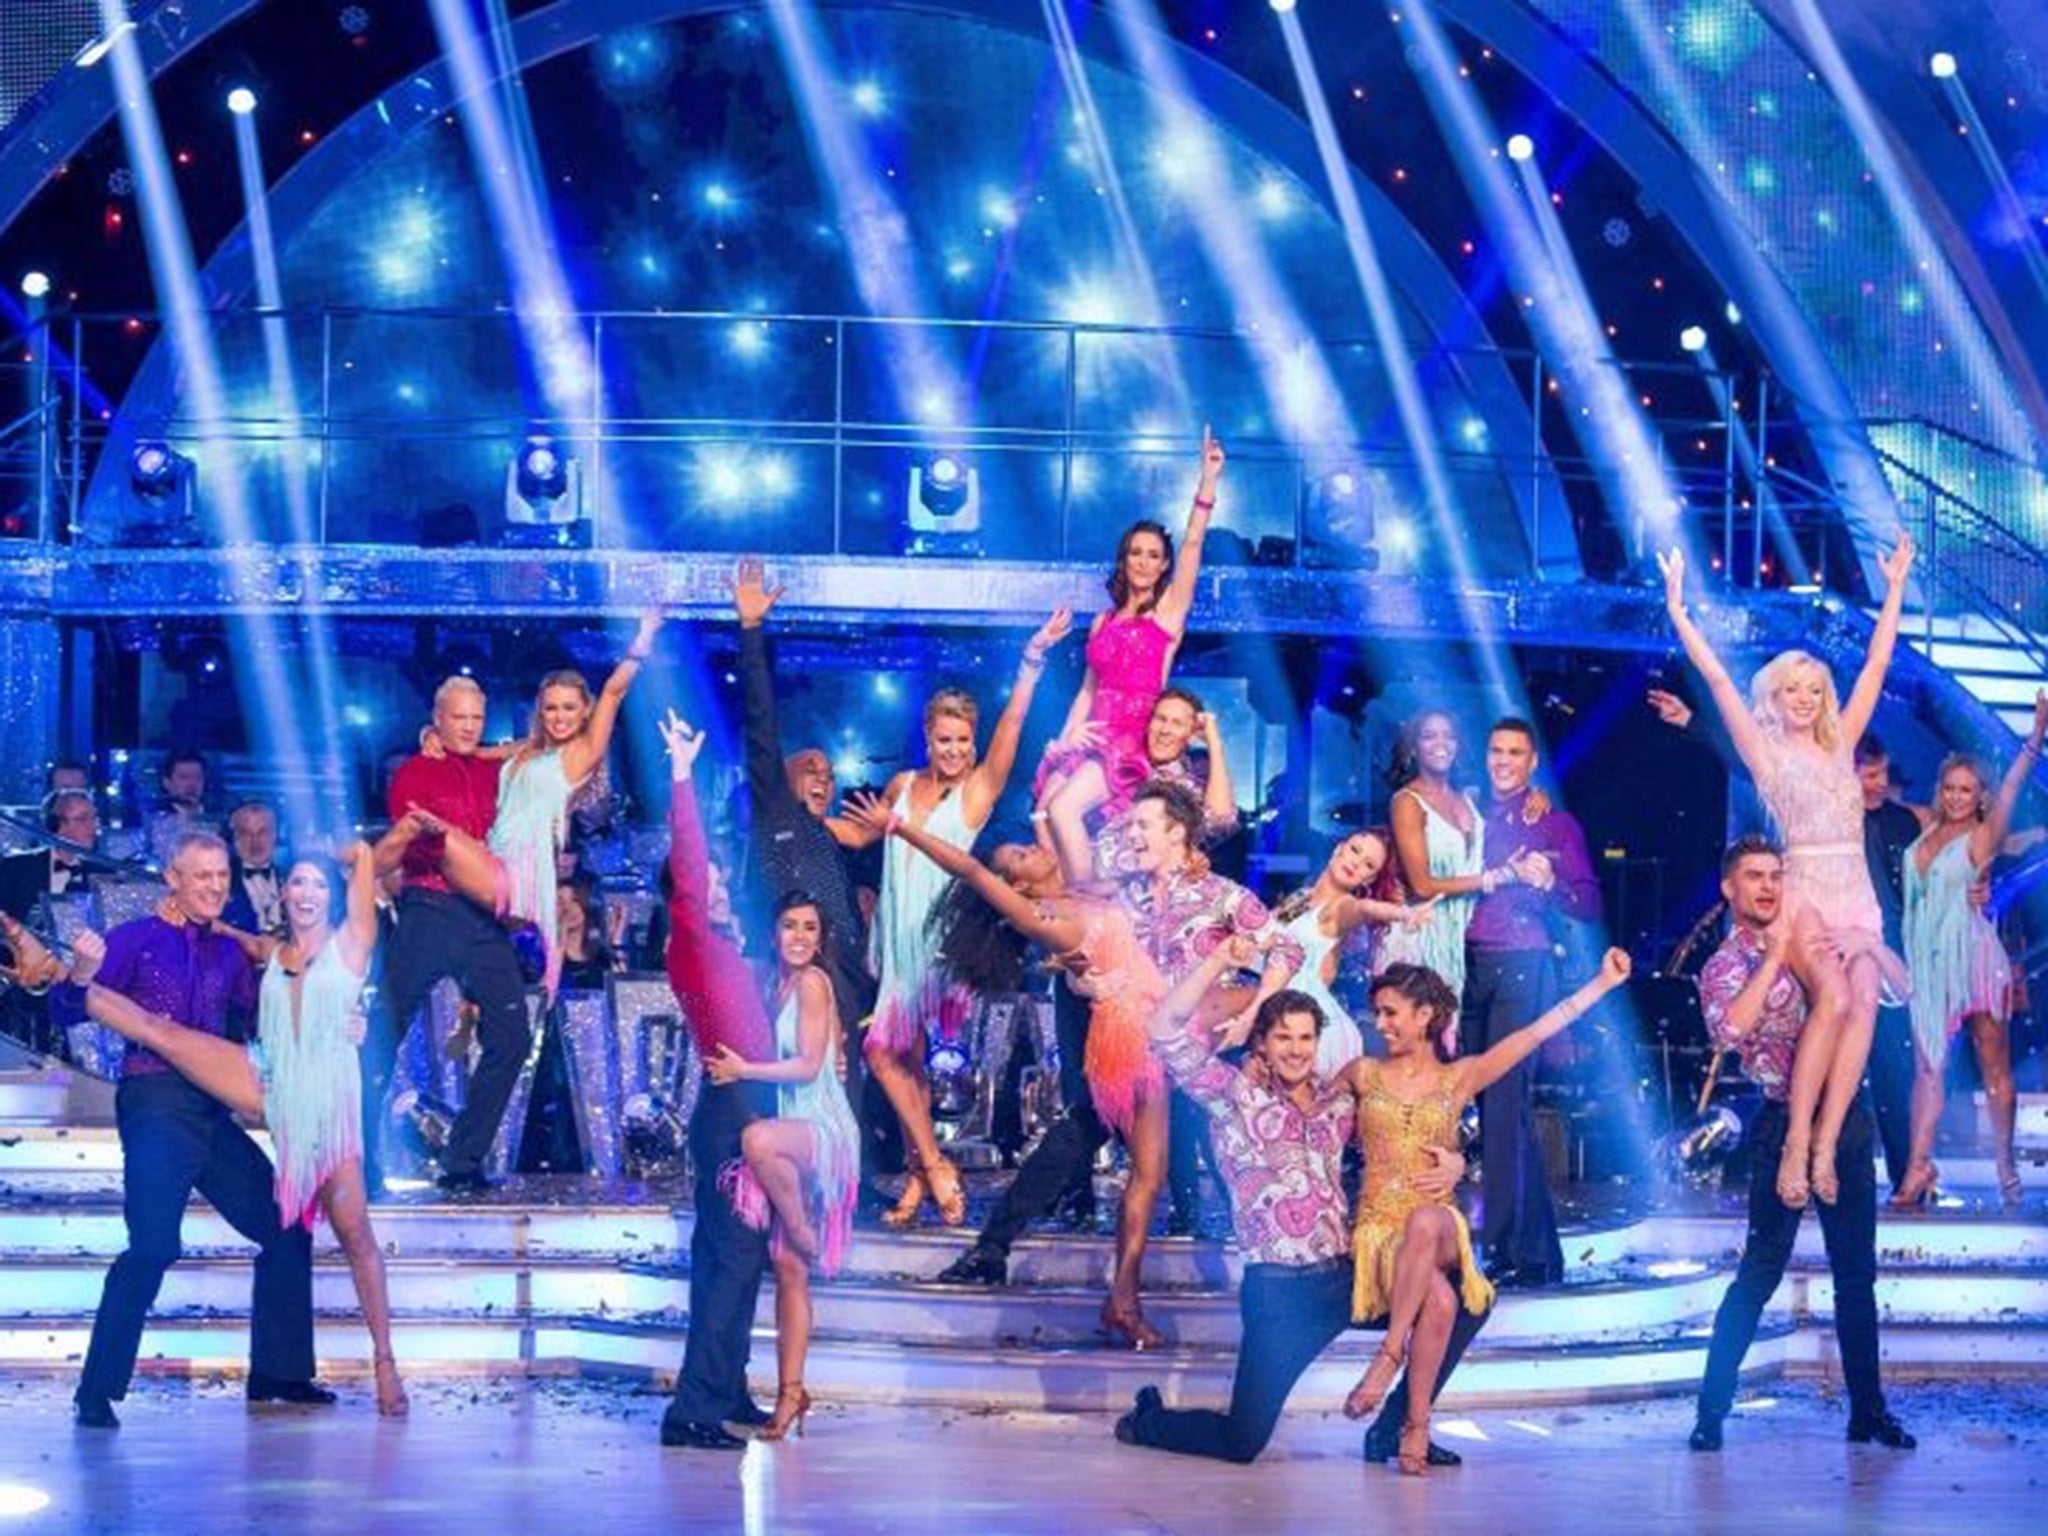 Contestants and professional dancers during an edition of Strictly Come Dancing.